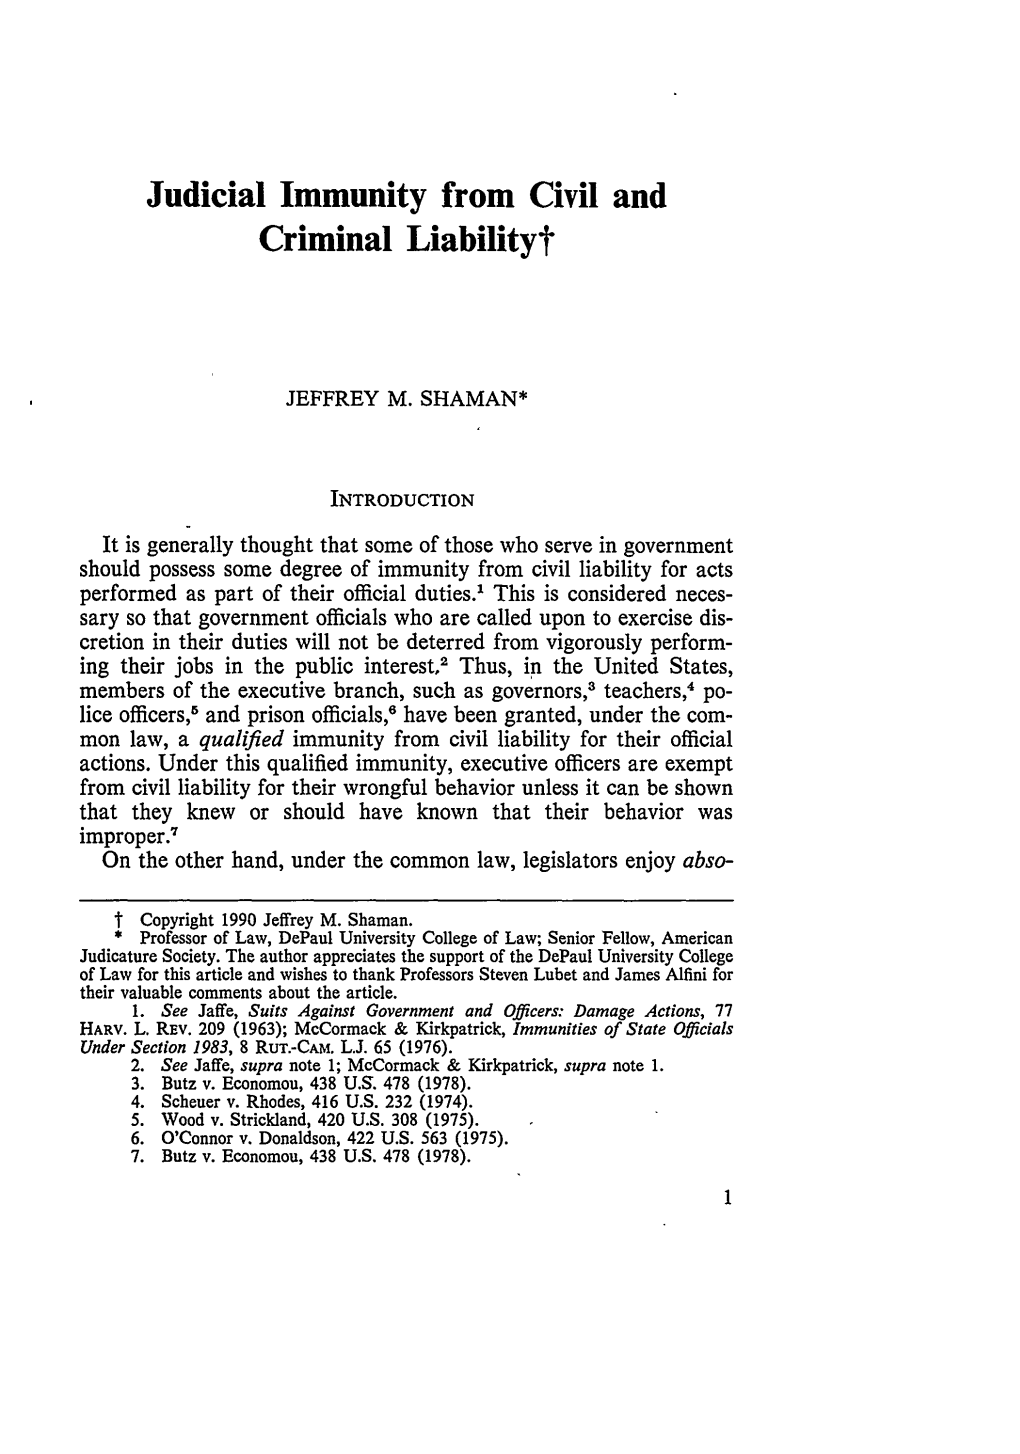 Judicial Immunity from Civil and Criminal Liabilityt